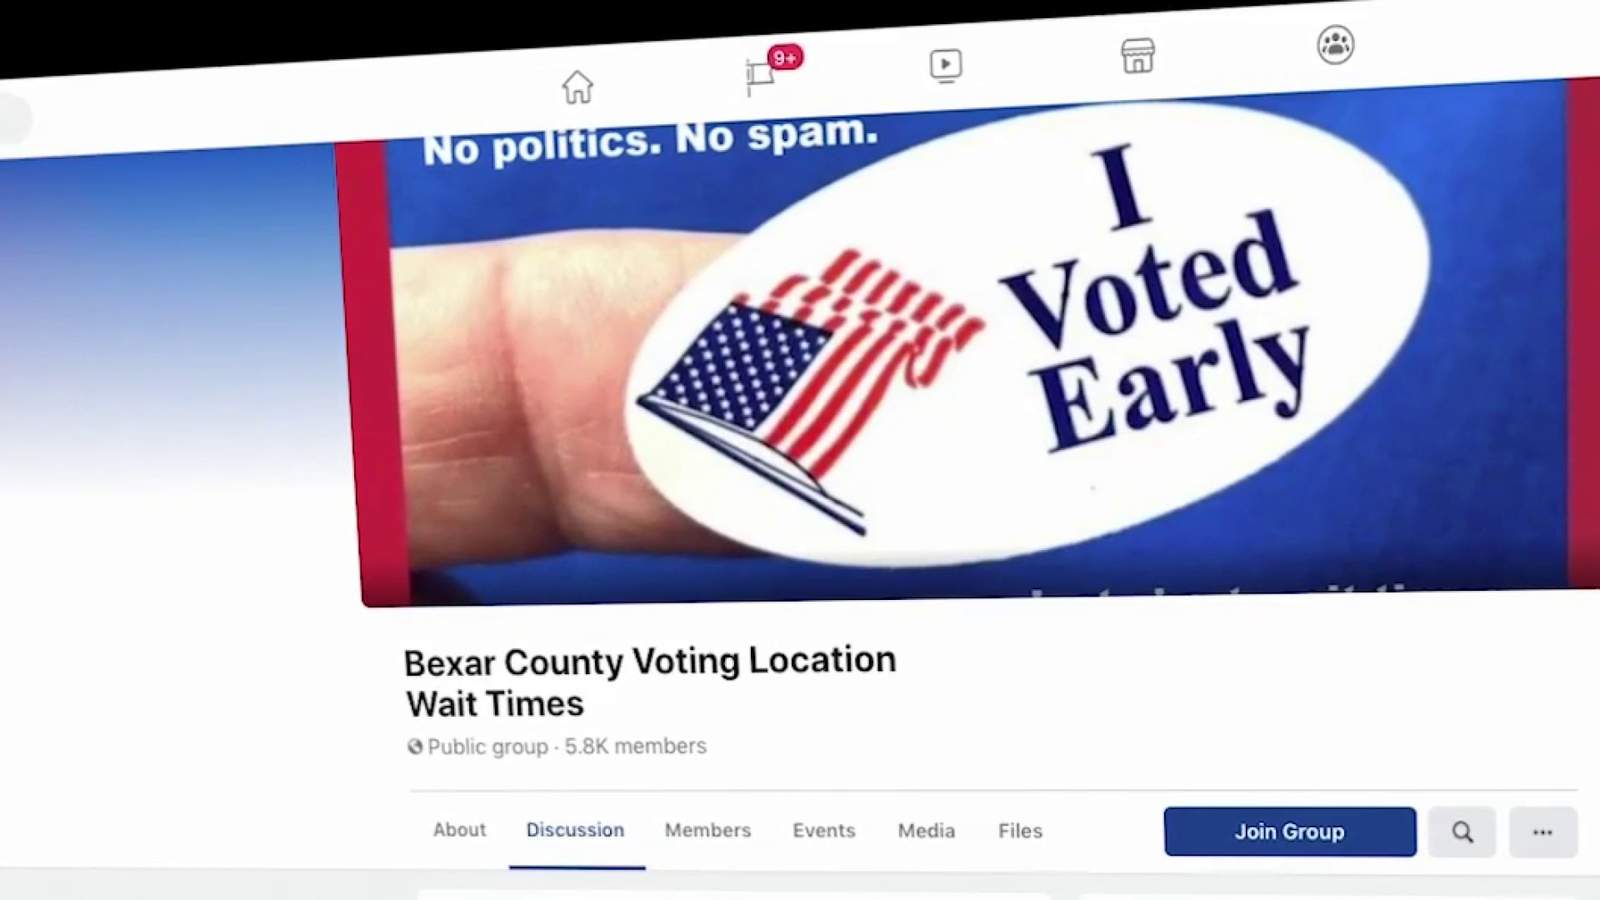 New Facebook group gives Bexar County voters shortest early vote wait times